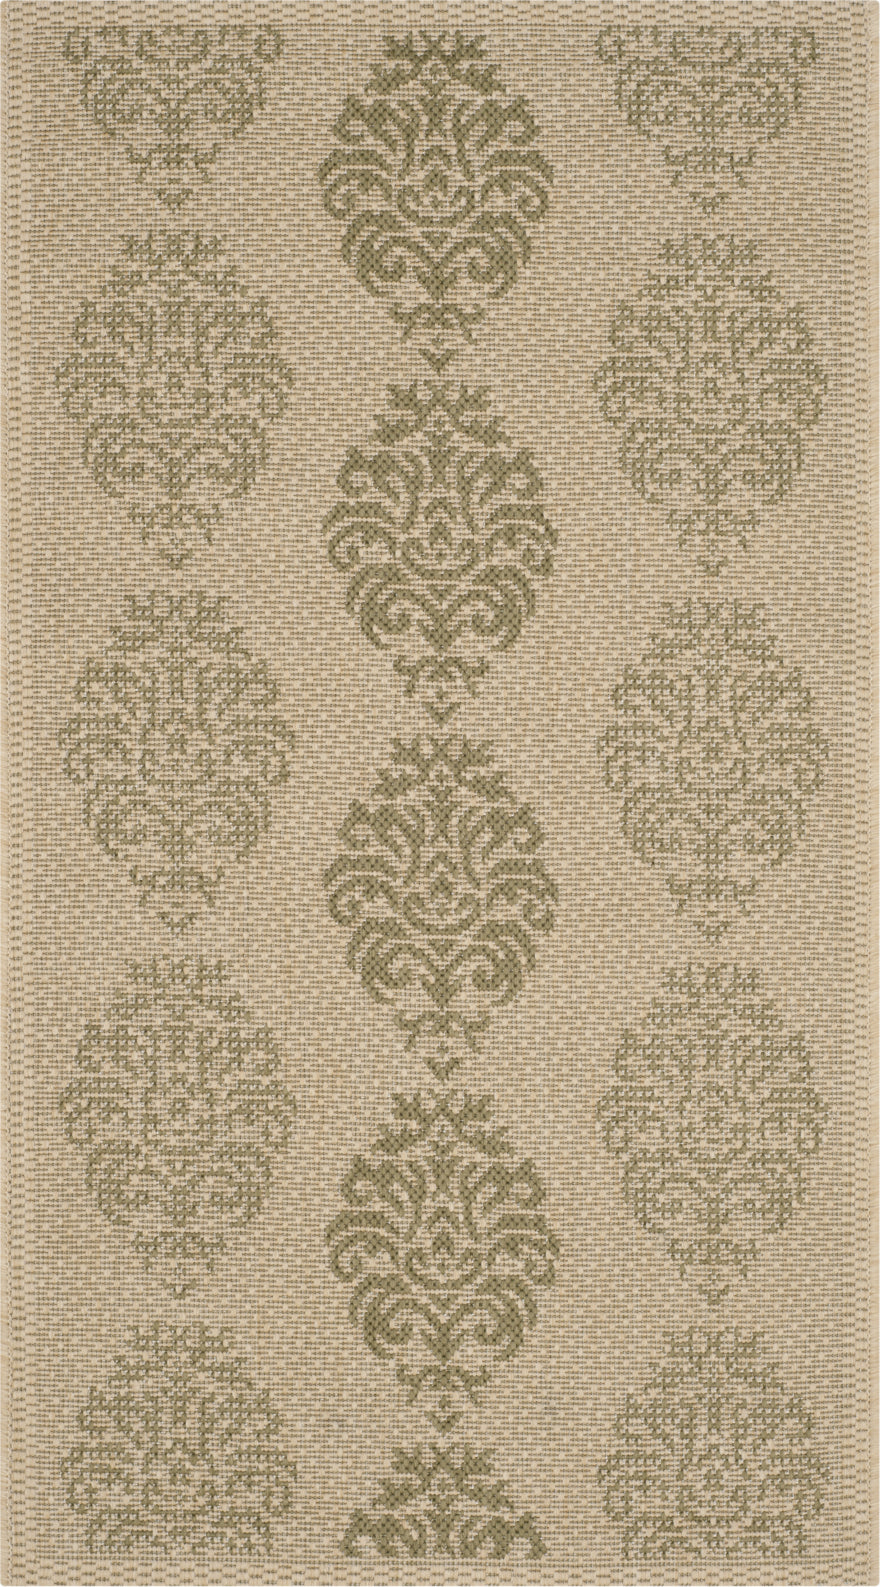 Safavieh Courtyard CY2720 Natural/Olive Area Rug main image